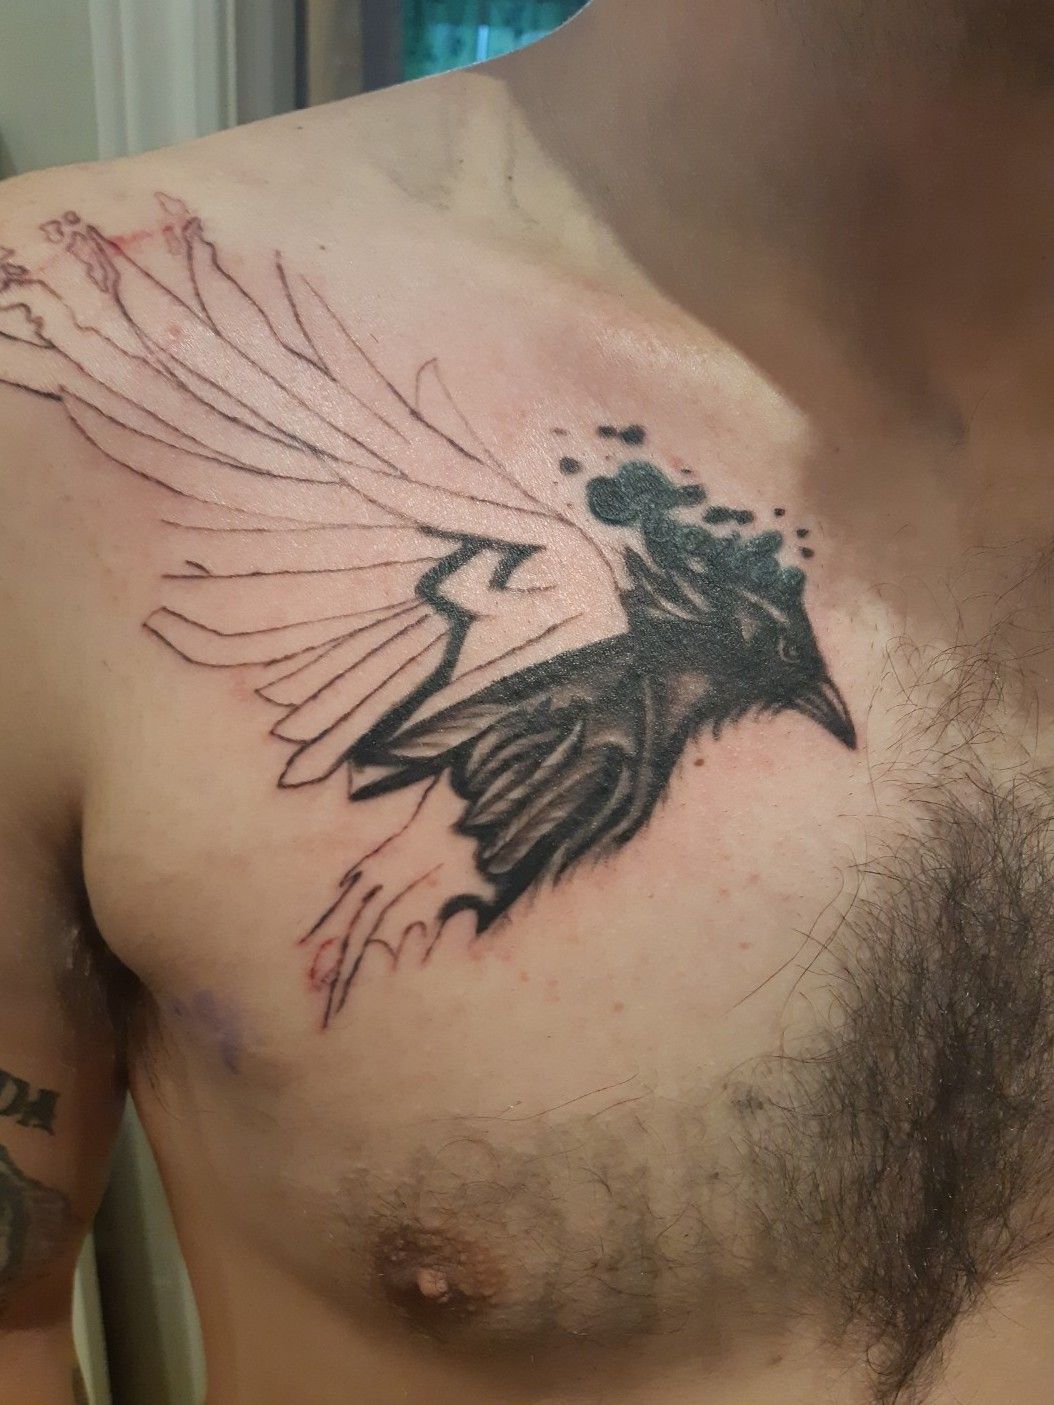 Fortis Tattoo Studio  mgingell had fun finishing these two viking  style ravens today on a top dude Cheers Simon  Cant wait to start this  leg project Done using egomachines Vertex